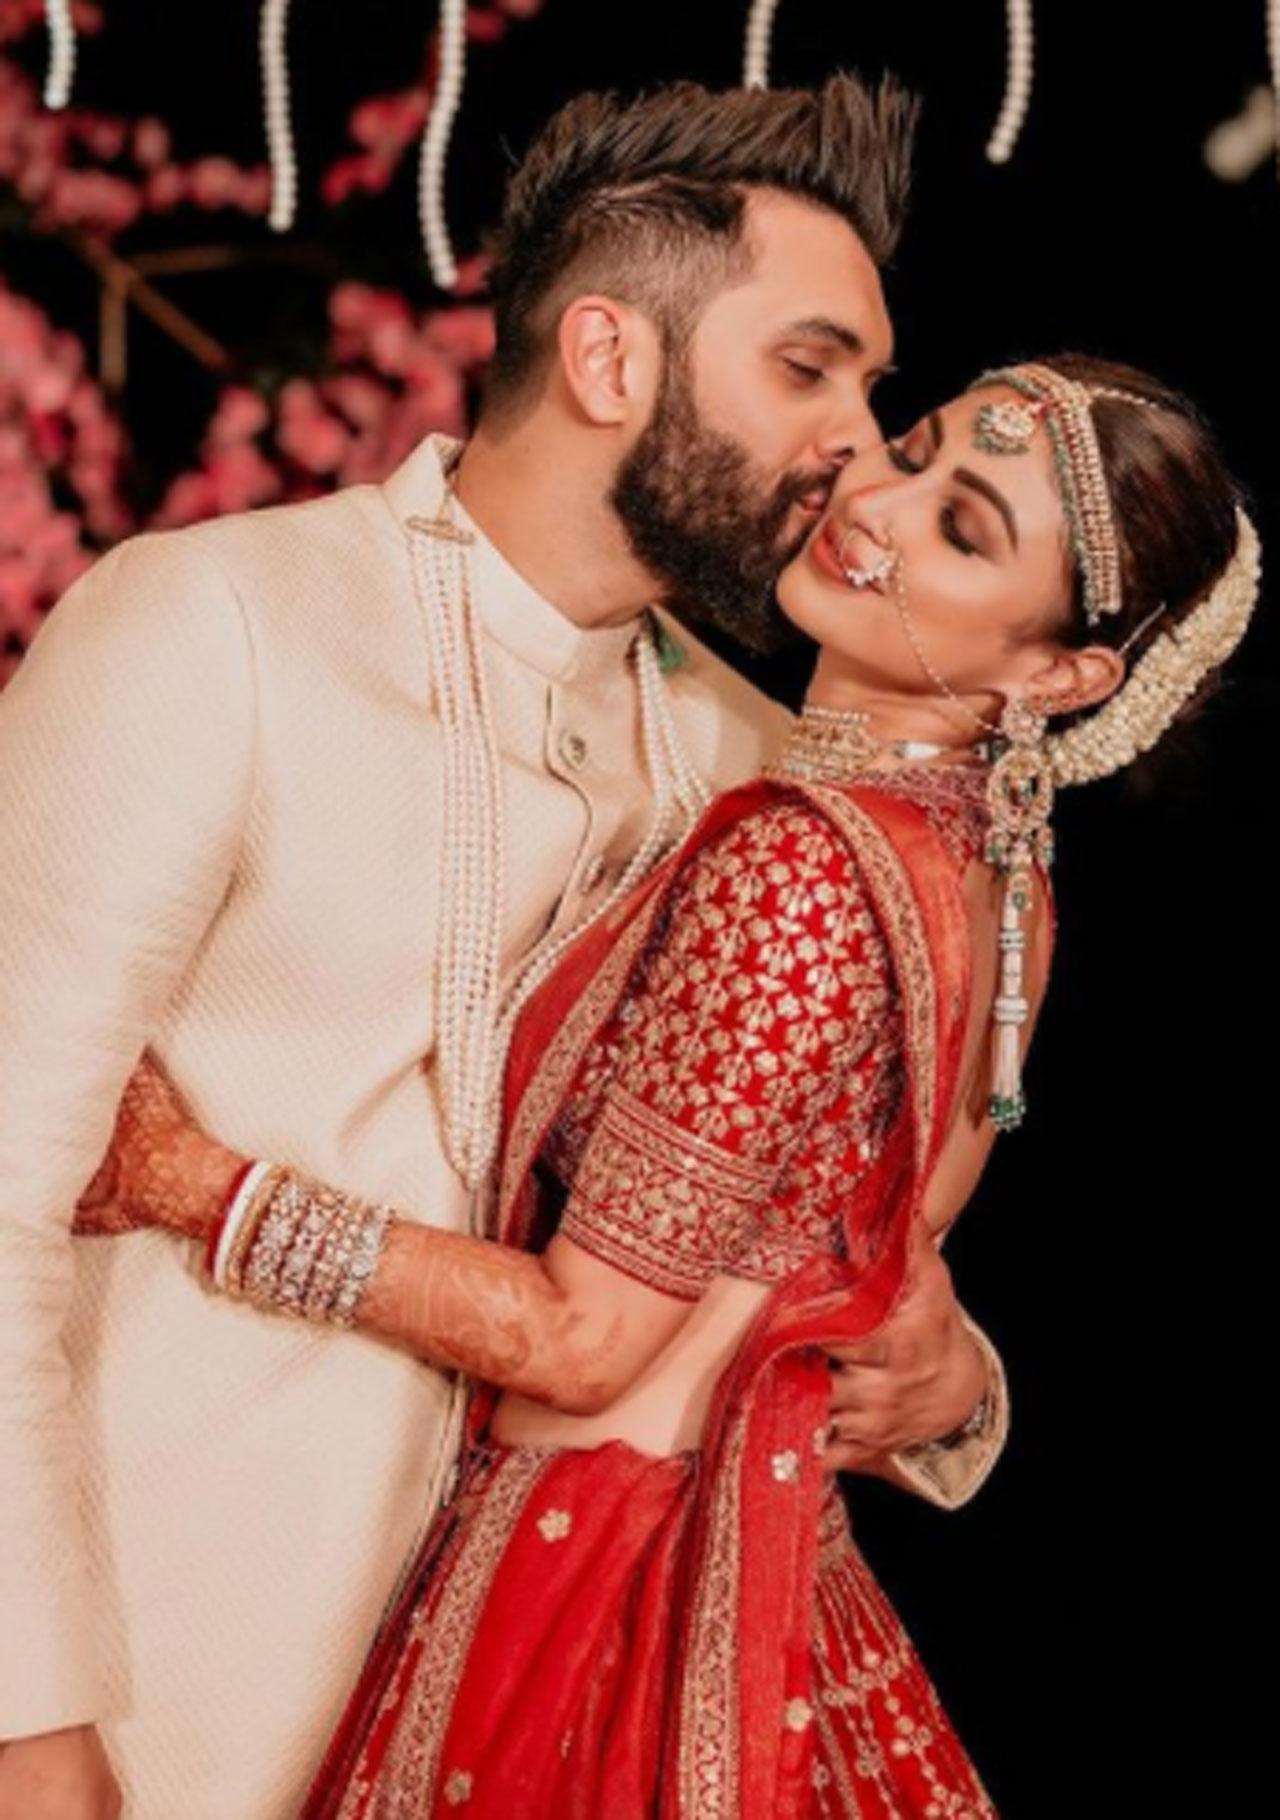 Madhuri Dixit, with whom Mouni has shaken a leg together on a reality show, shared a collage of happy pictures from the wedding on her Instagram Story and wrote, 